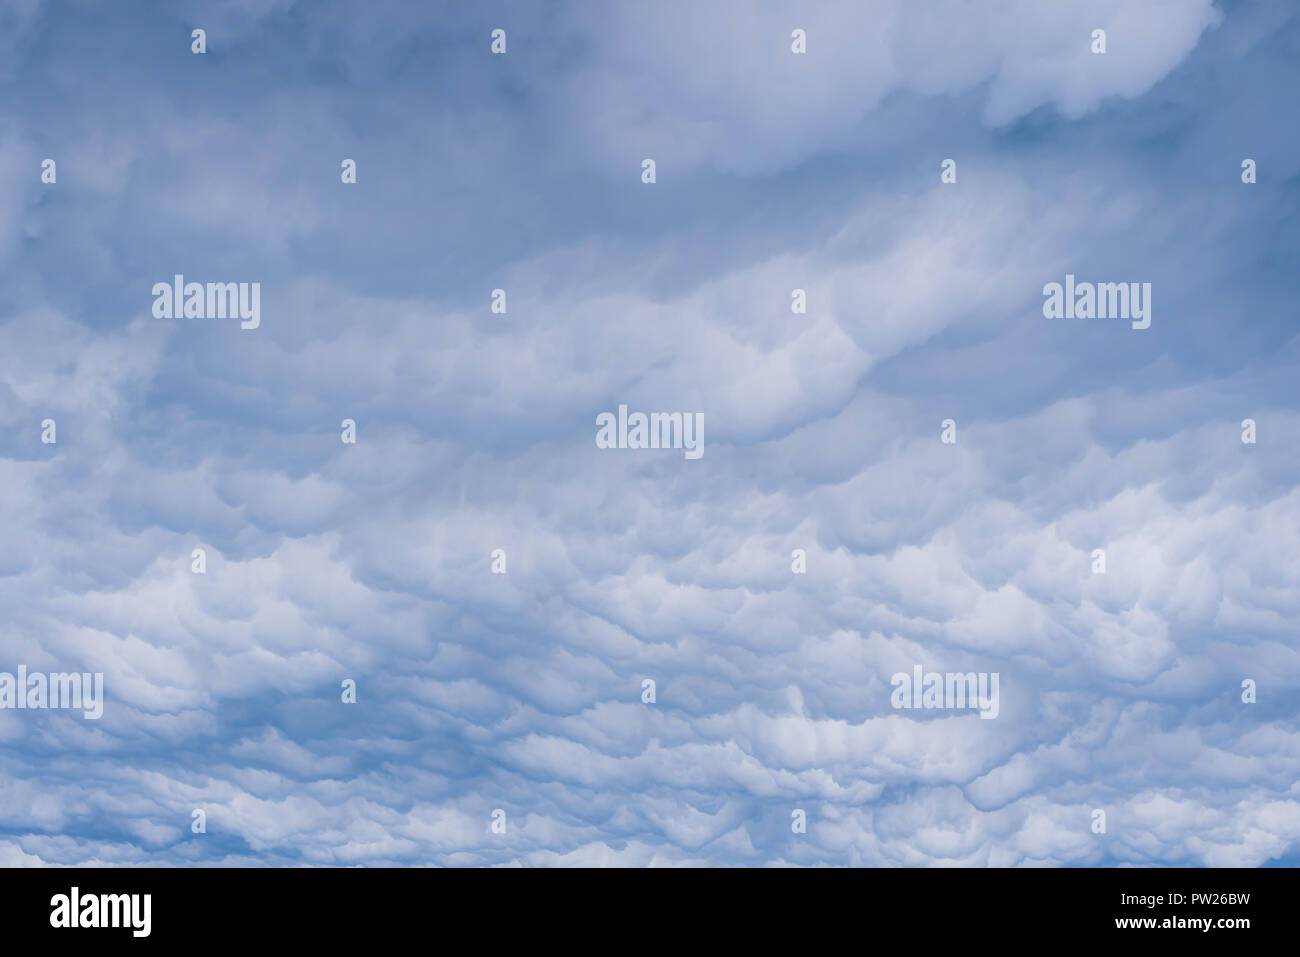 The Stratocumulus cloud formation Stock Photo